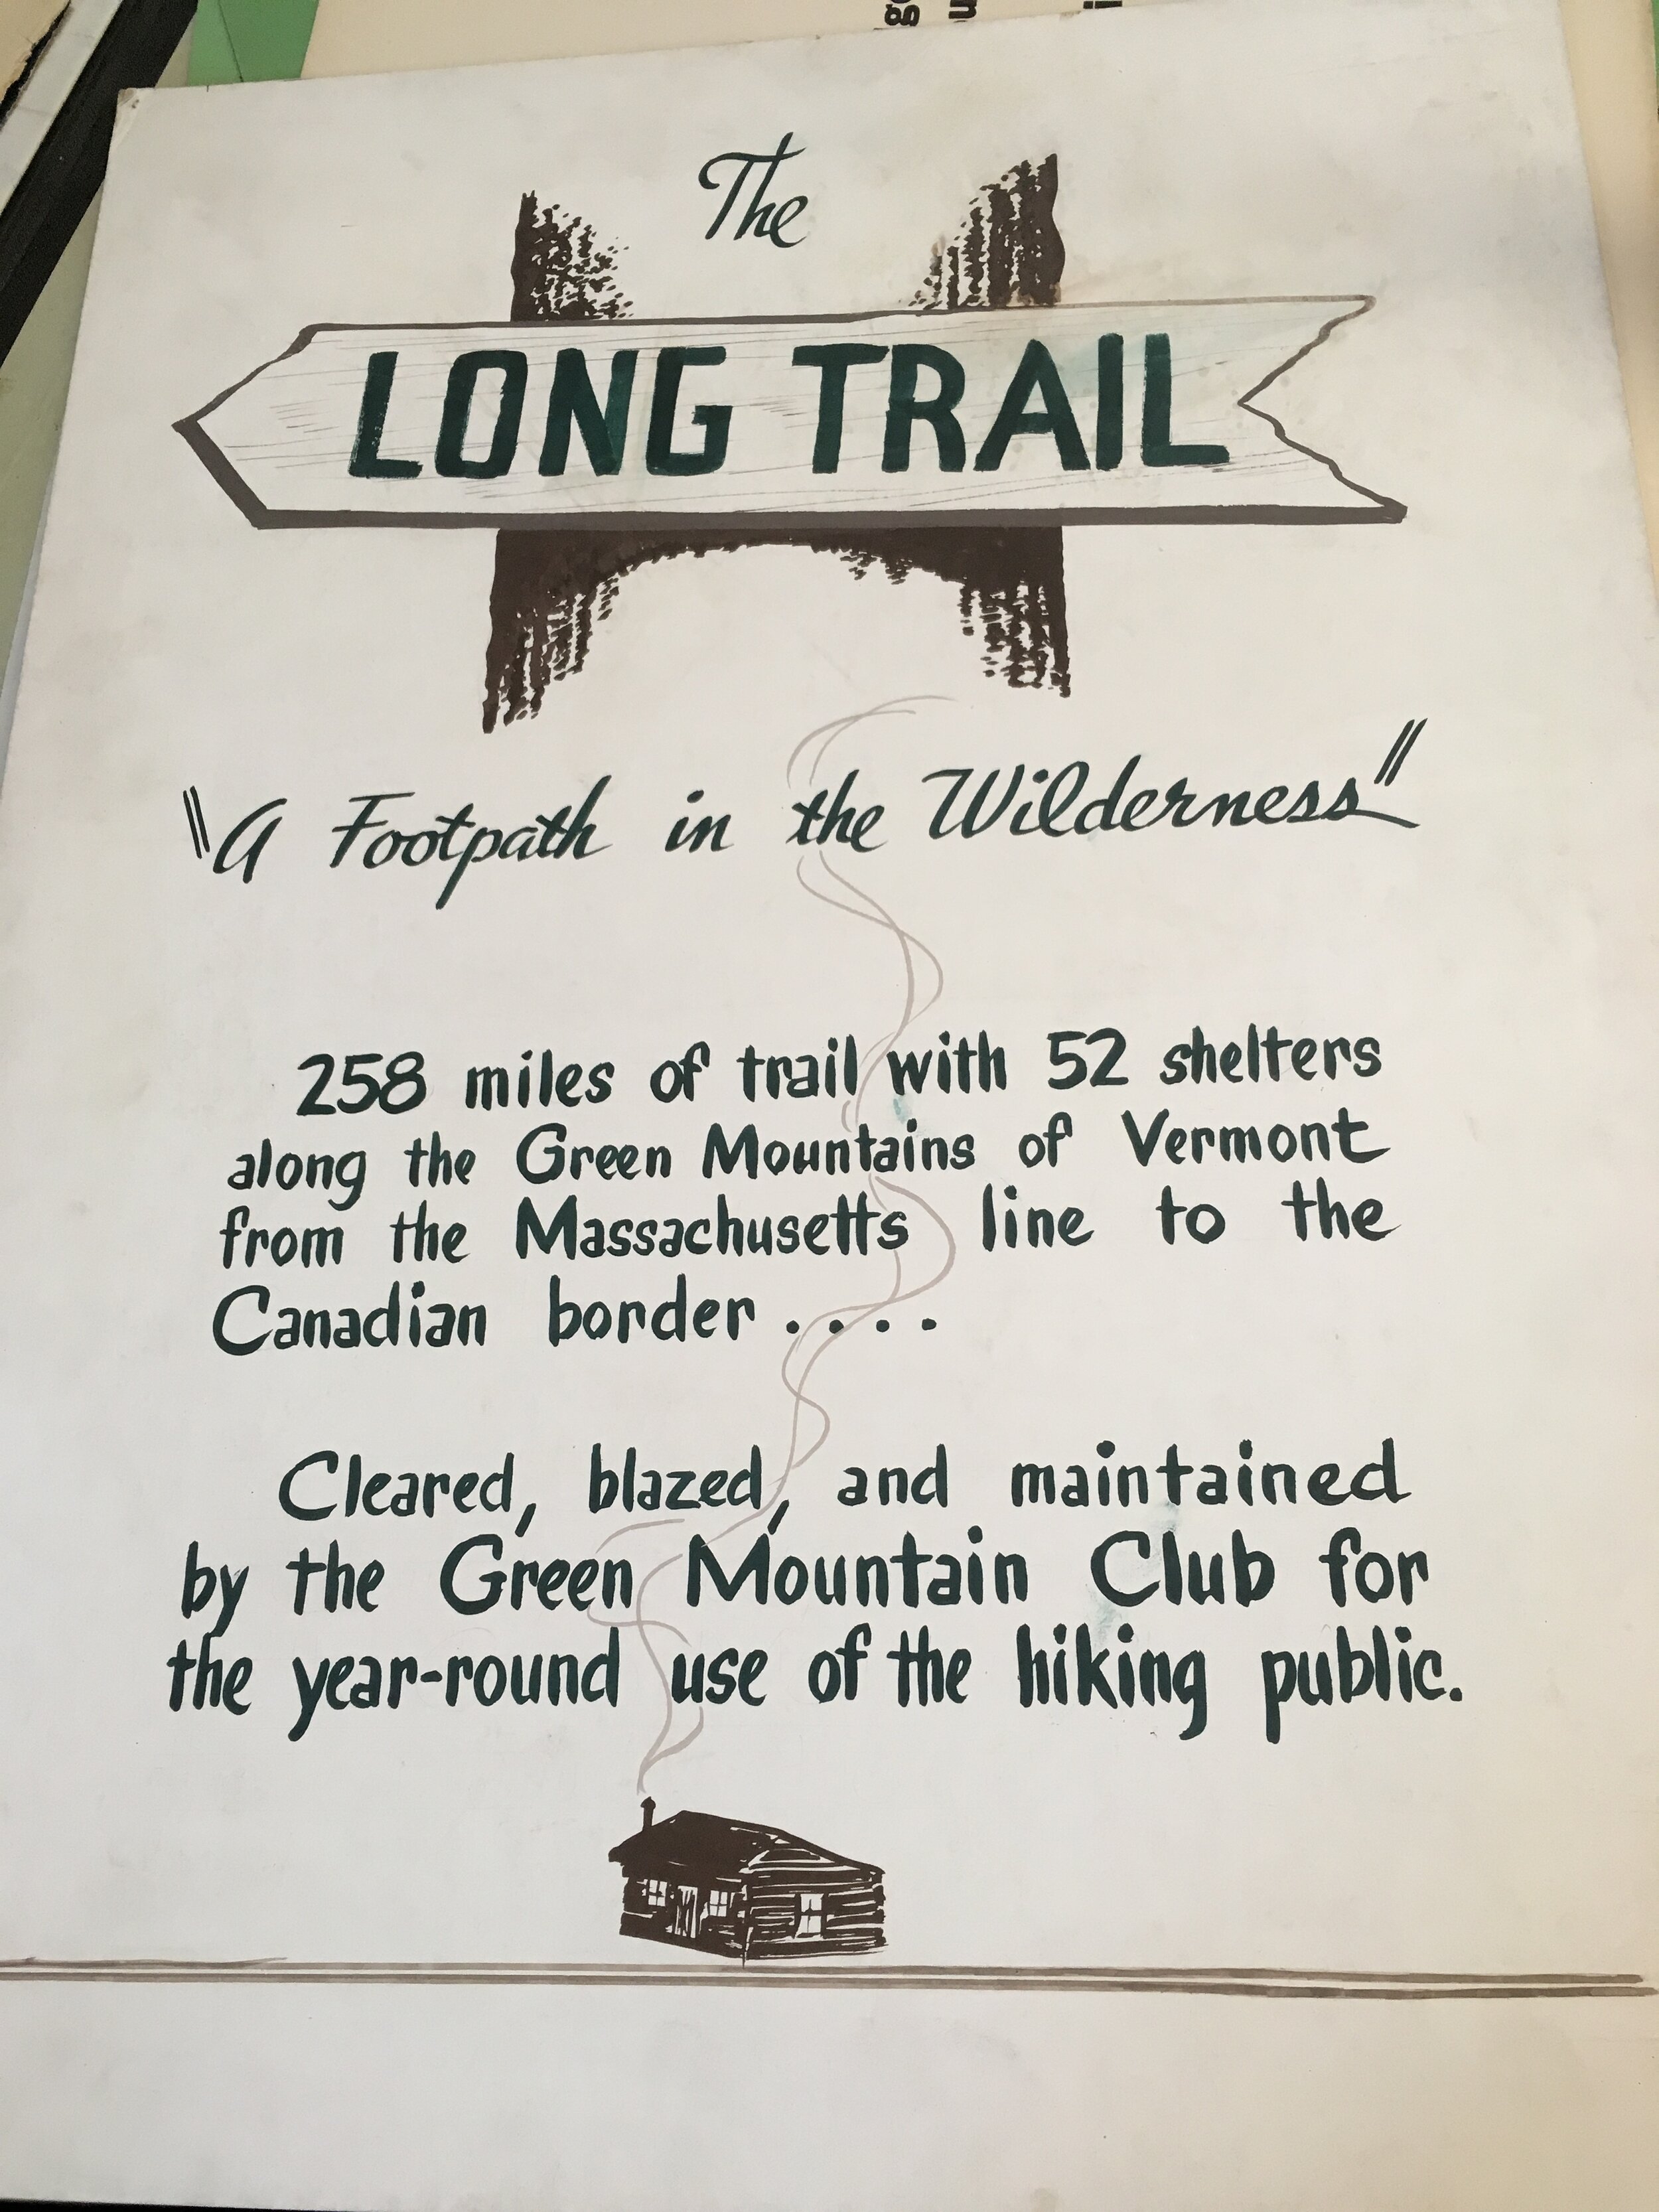   Handpainted Long Trail sign (Green Mountain Club Archives).  